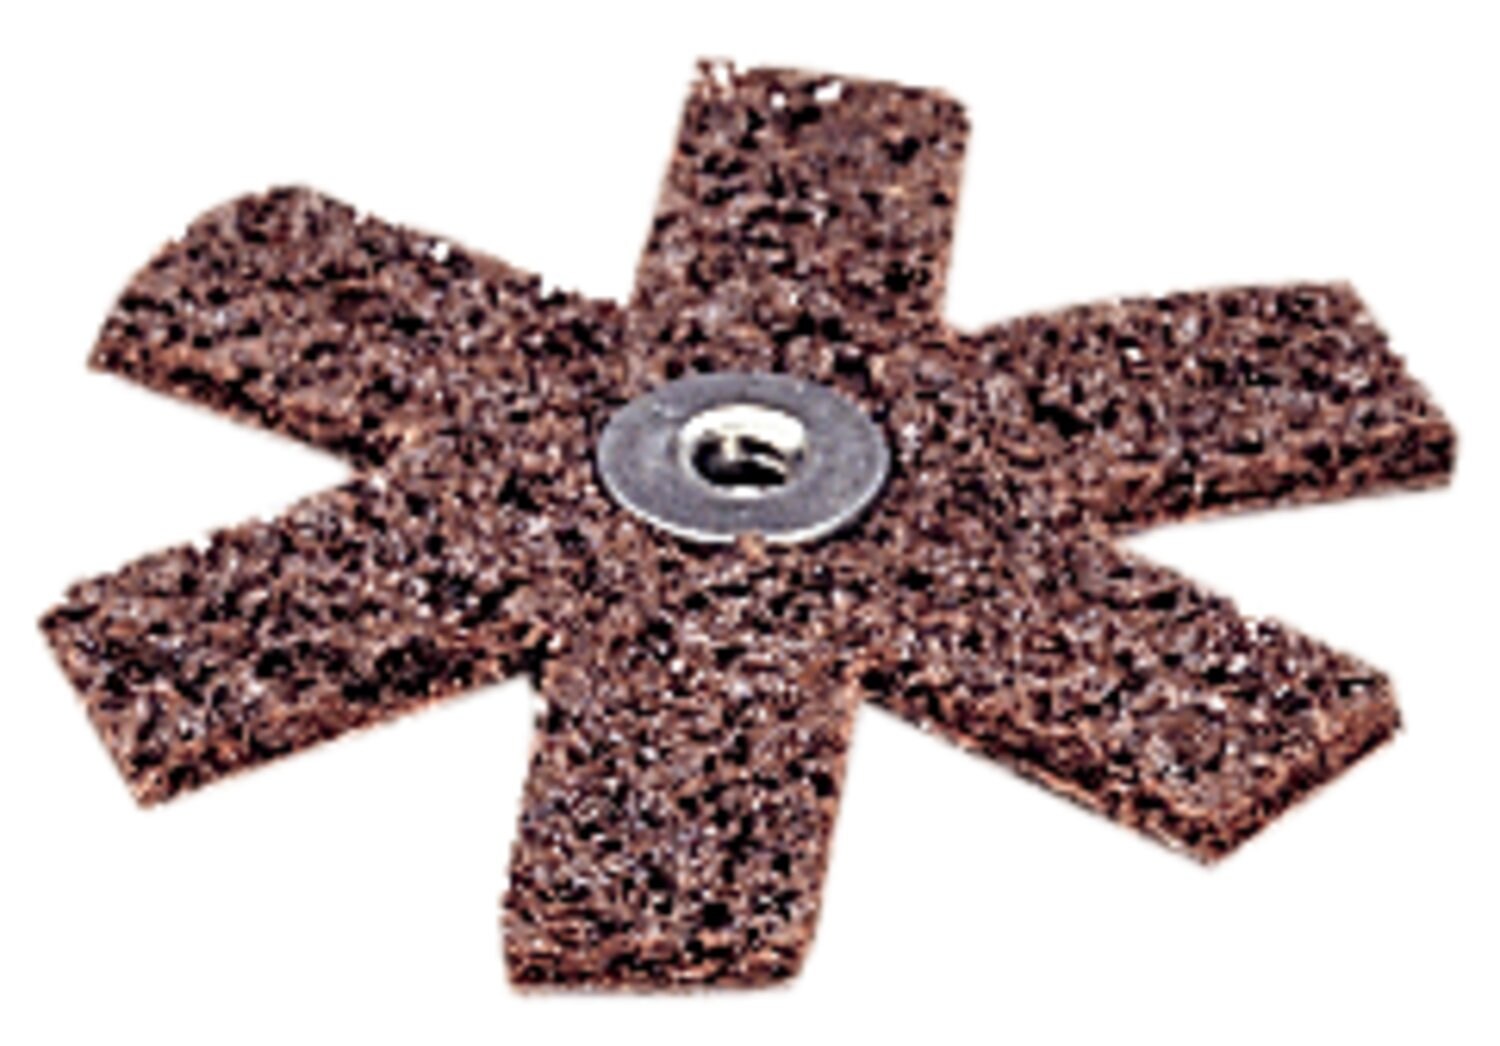 7010330505 - Standard Abrasives Surface Conditioning Star 724605, 2 in x 1/4-20 CRS,
50 ea/Case